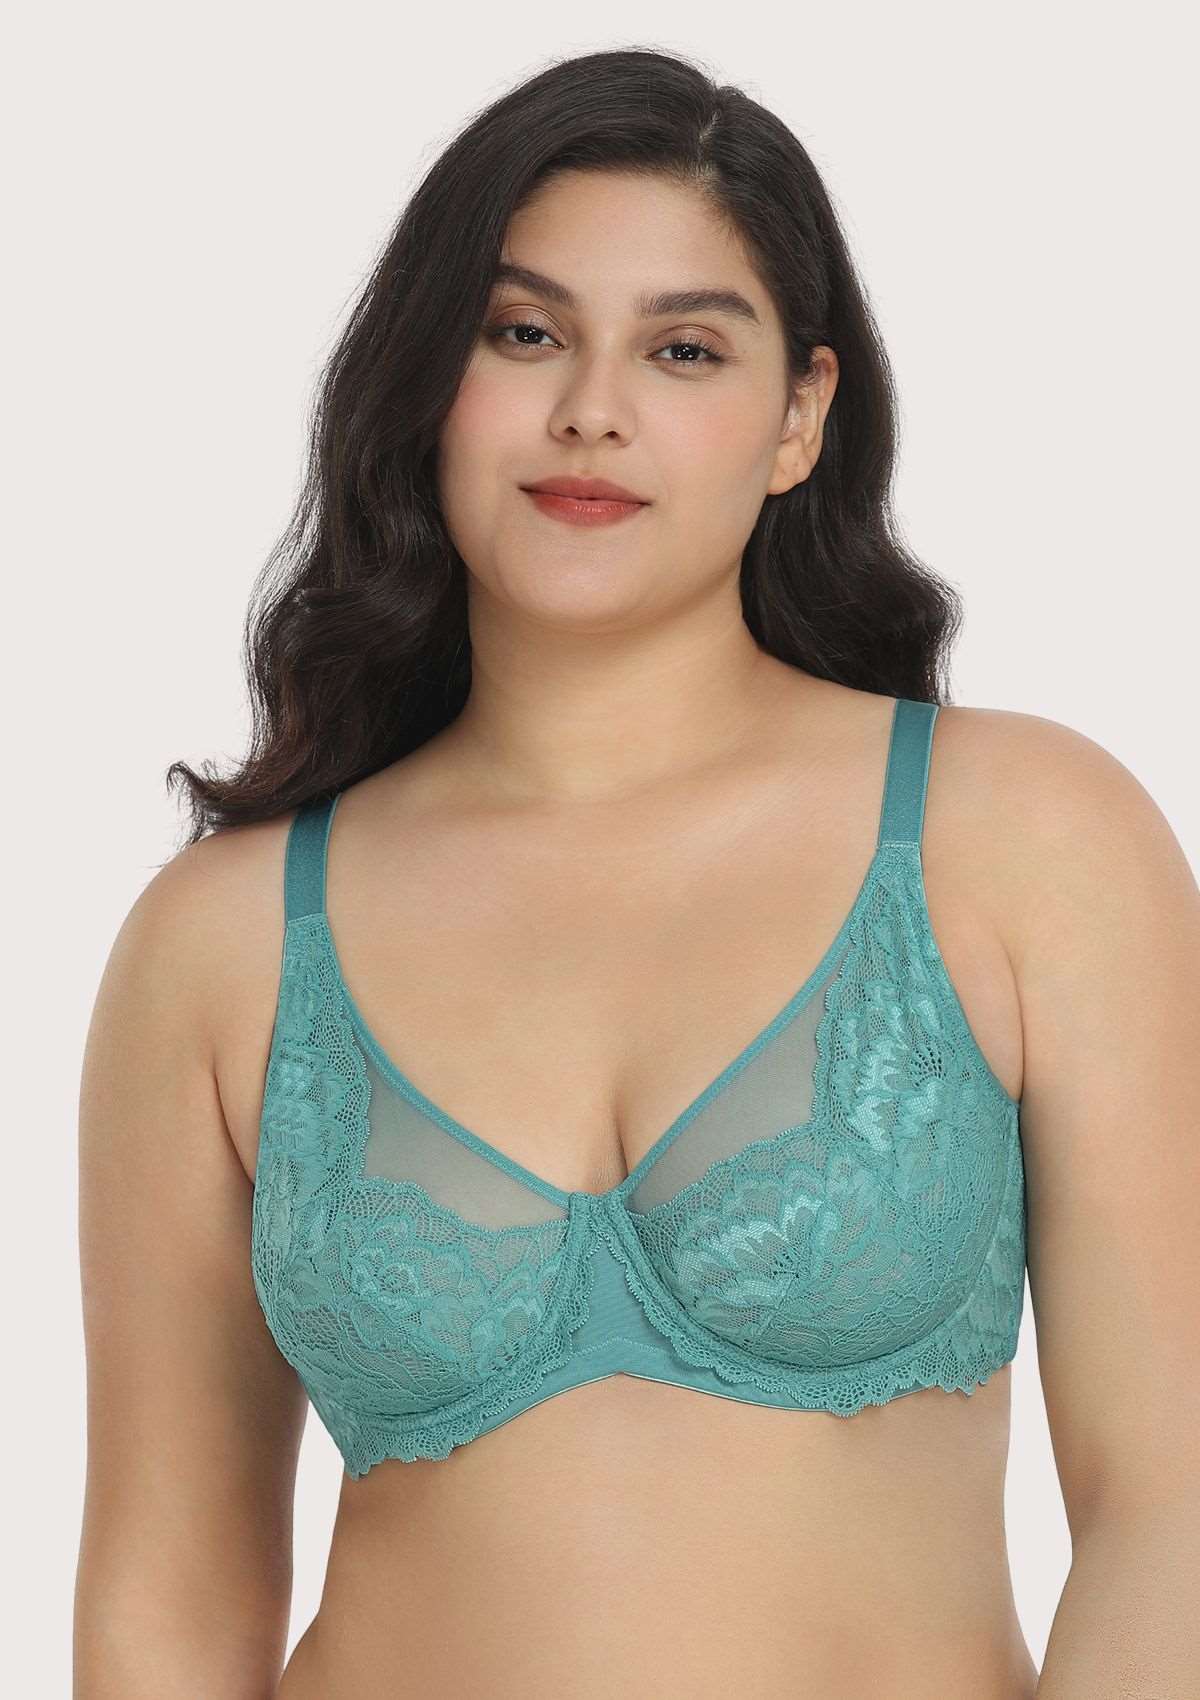 HSIA Paeonia Lace Full Coverage Underwire Non-Padded Uplifting Bra - Light Coral / 34 / C